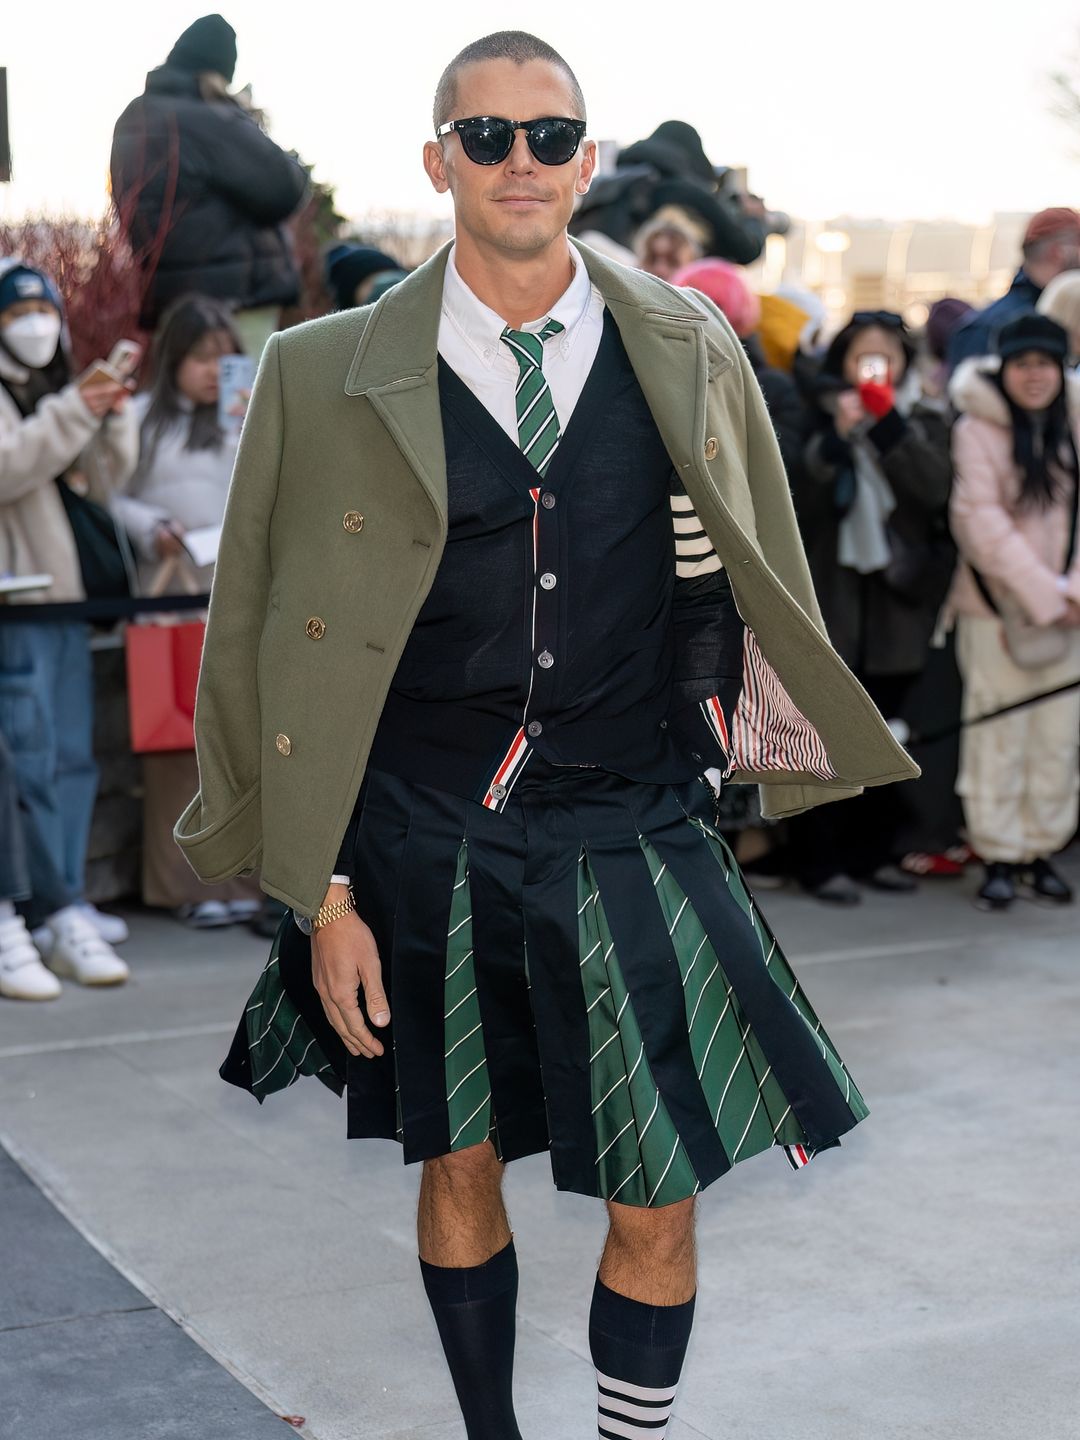 Antoni Porowski is seen arriving to the Thom Browne fashion show in a pleated skirt, blazer and knee-high socks